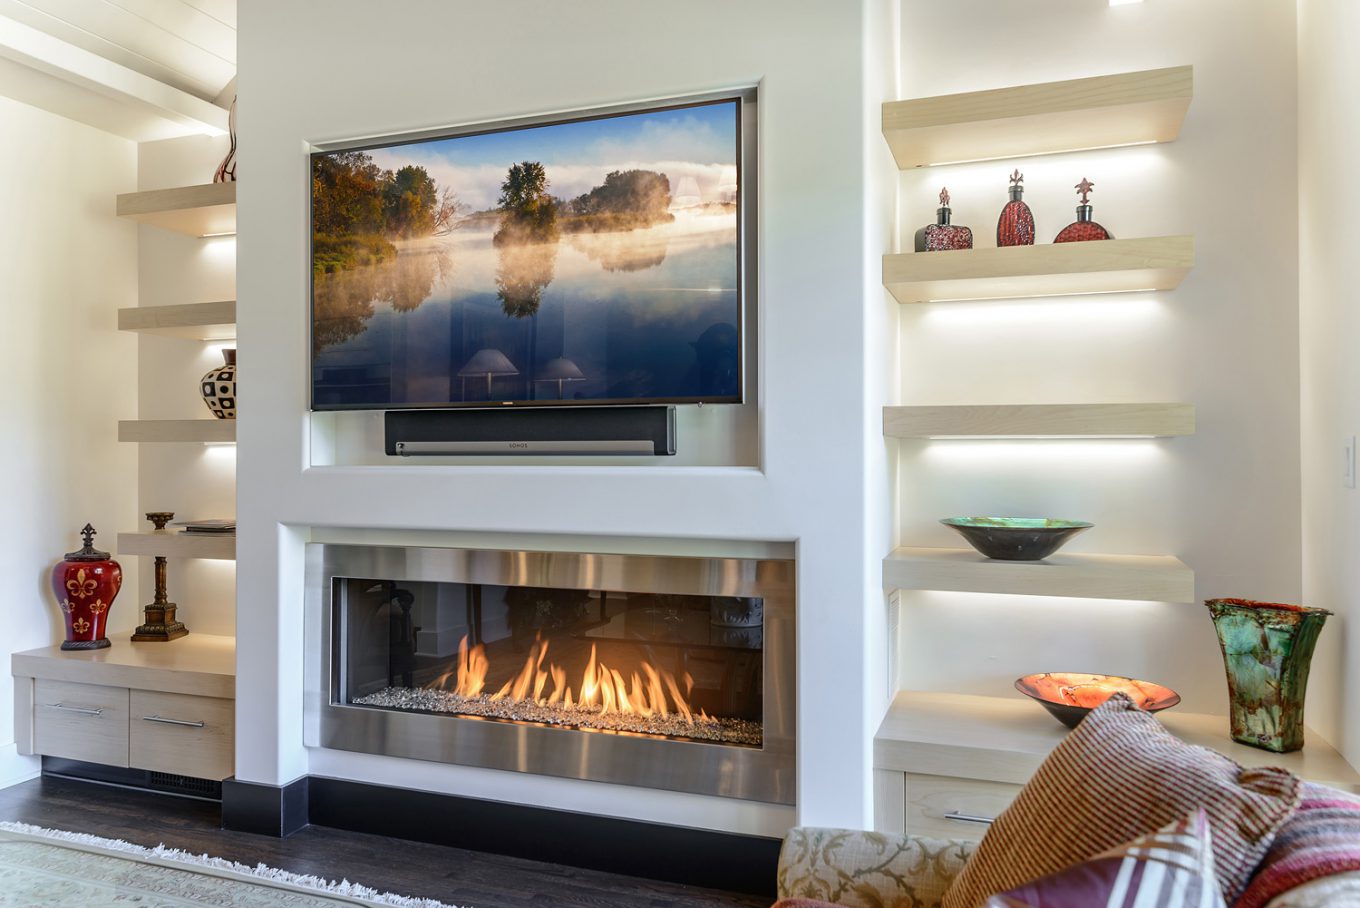 Ask the Experts: Should you Install a TV over a Fireplace?